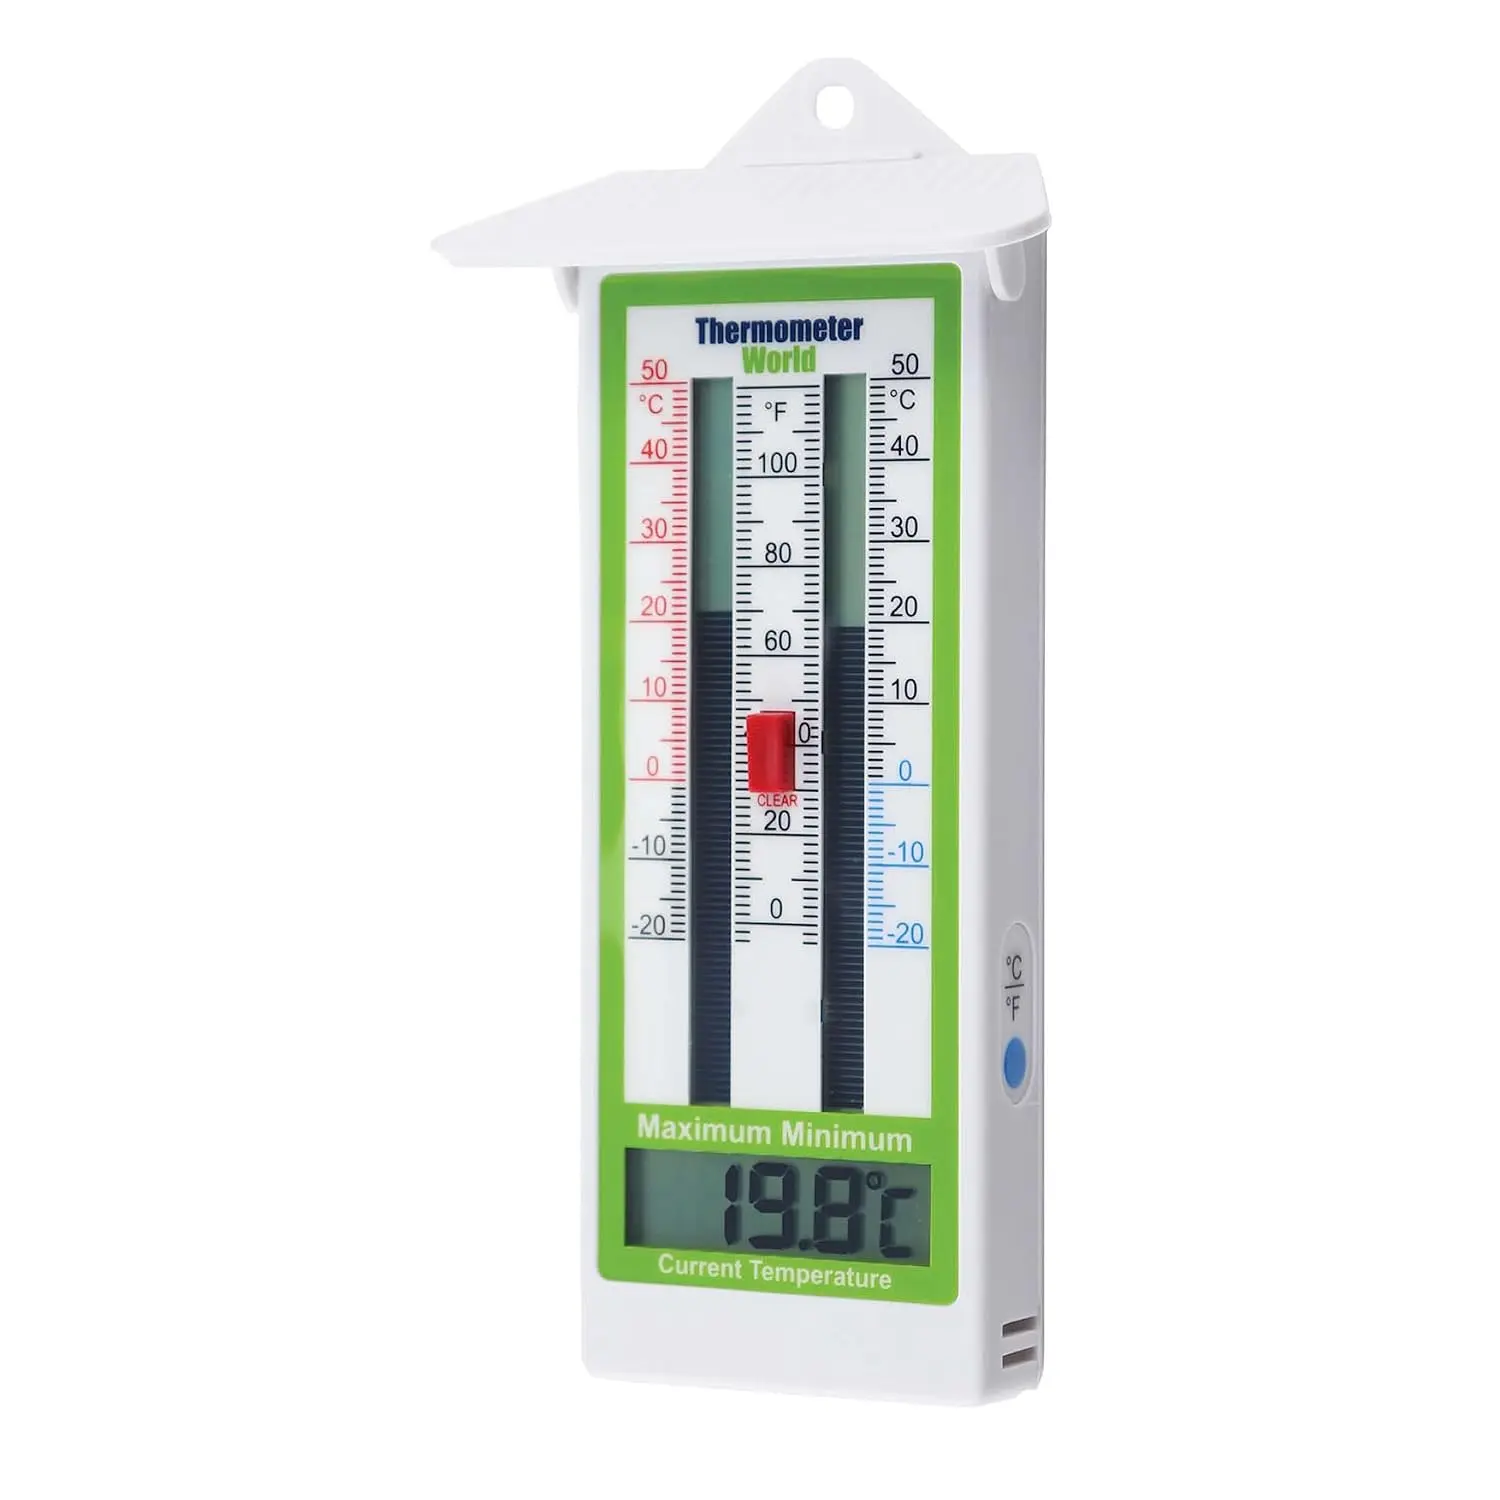 Thermometer World Archives - Crondall Weather